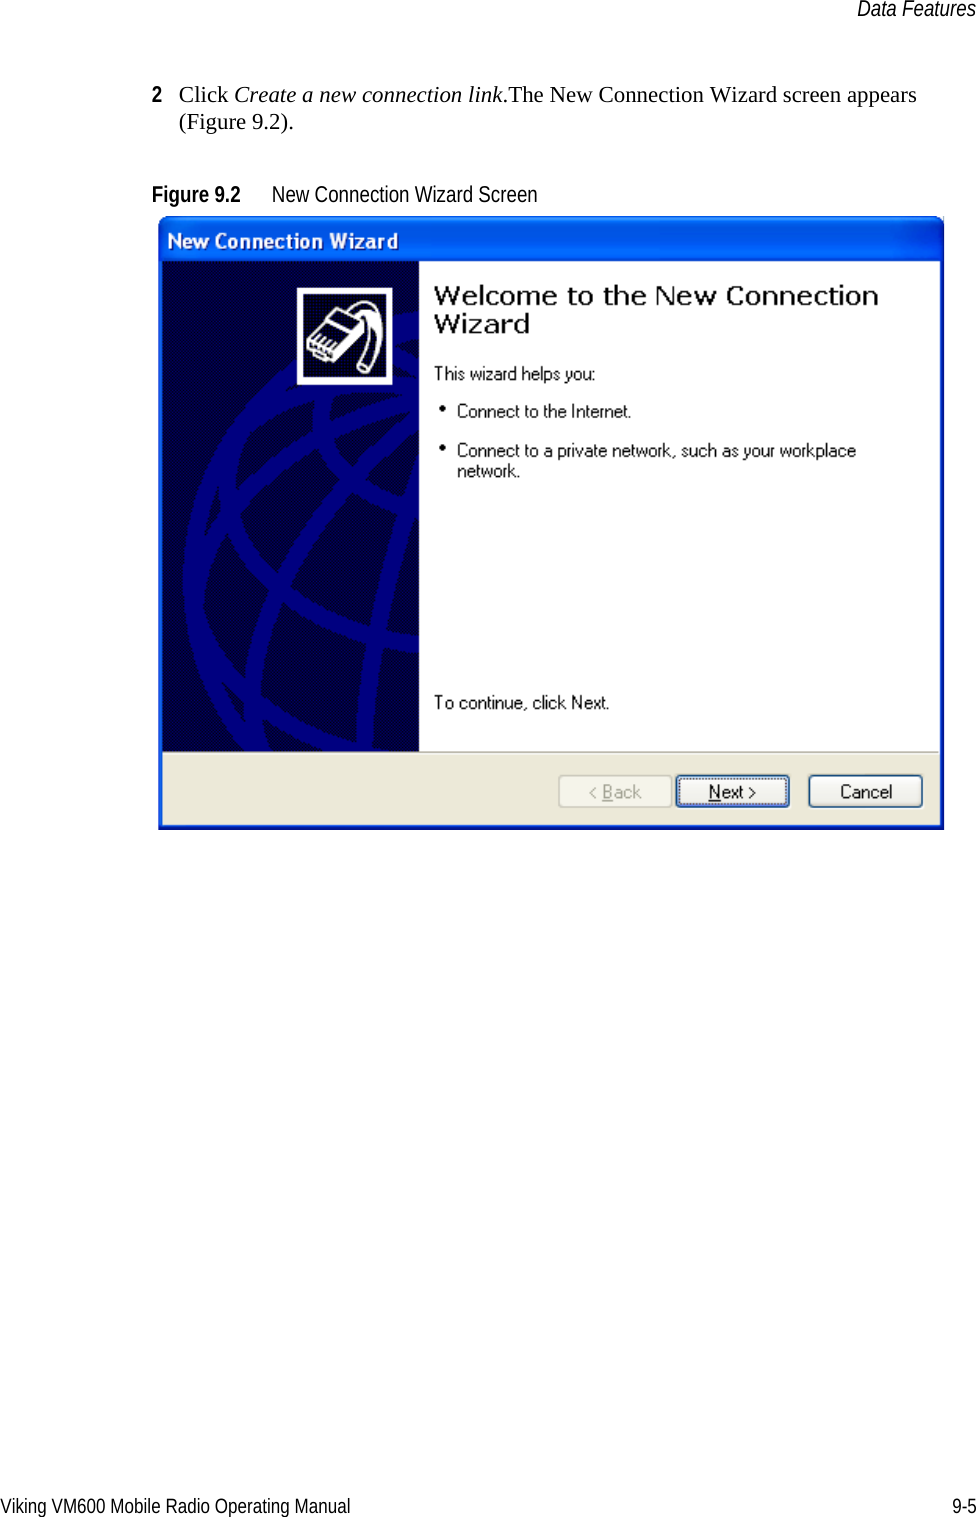 Viking VM600 Mobile Radio Operating Manual 9-5Data Features2Click Create a new connection link.The New Connection Wizard screen appears (Figure 9.2).Figure 9.2 New Connection Wizard ScreenDraft 4/29/2014